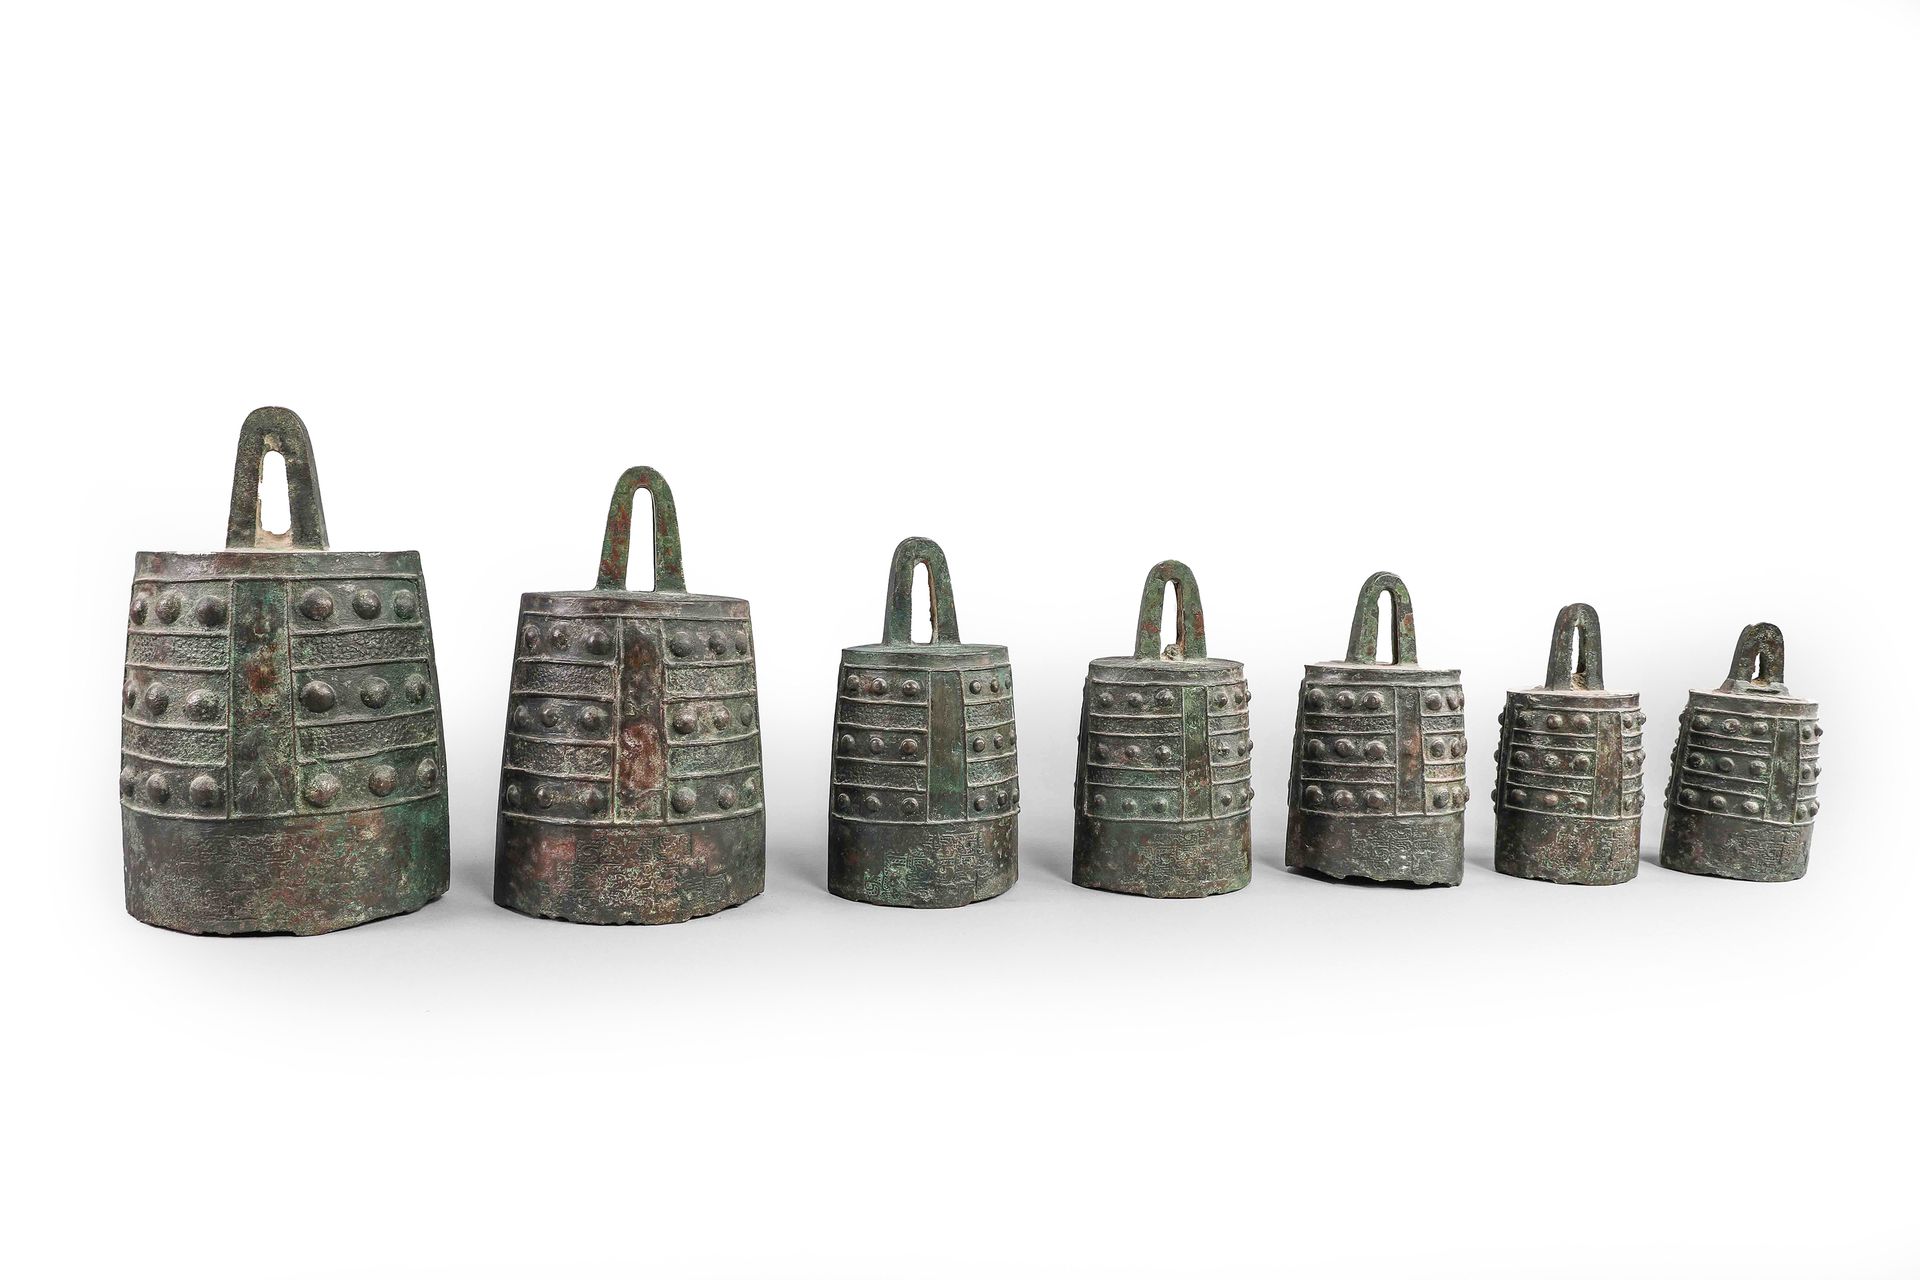 CHIMBER OF SEVEN "Yong Zhong" bronze bells, decorated with three lozenges in twe&hellip;